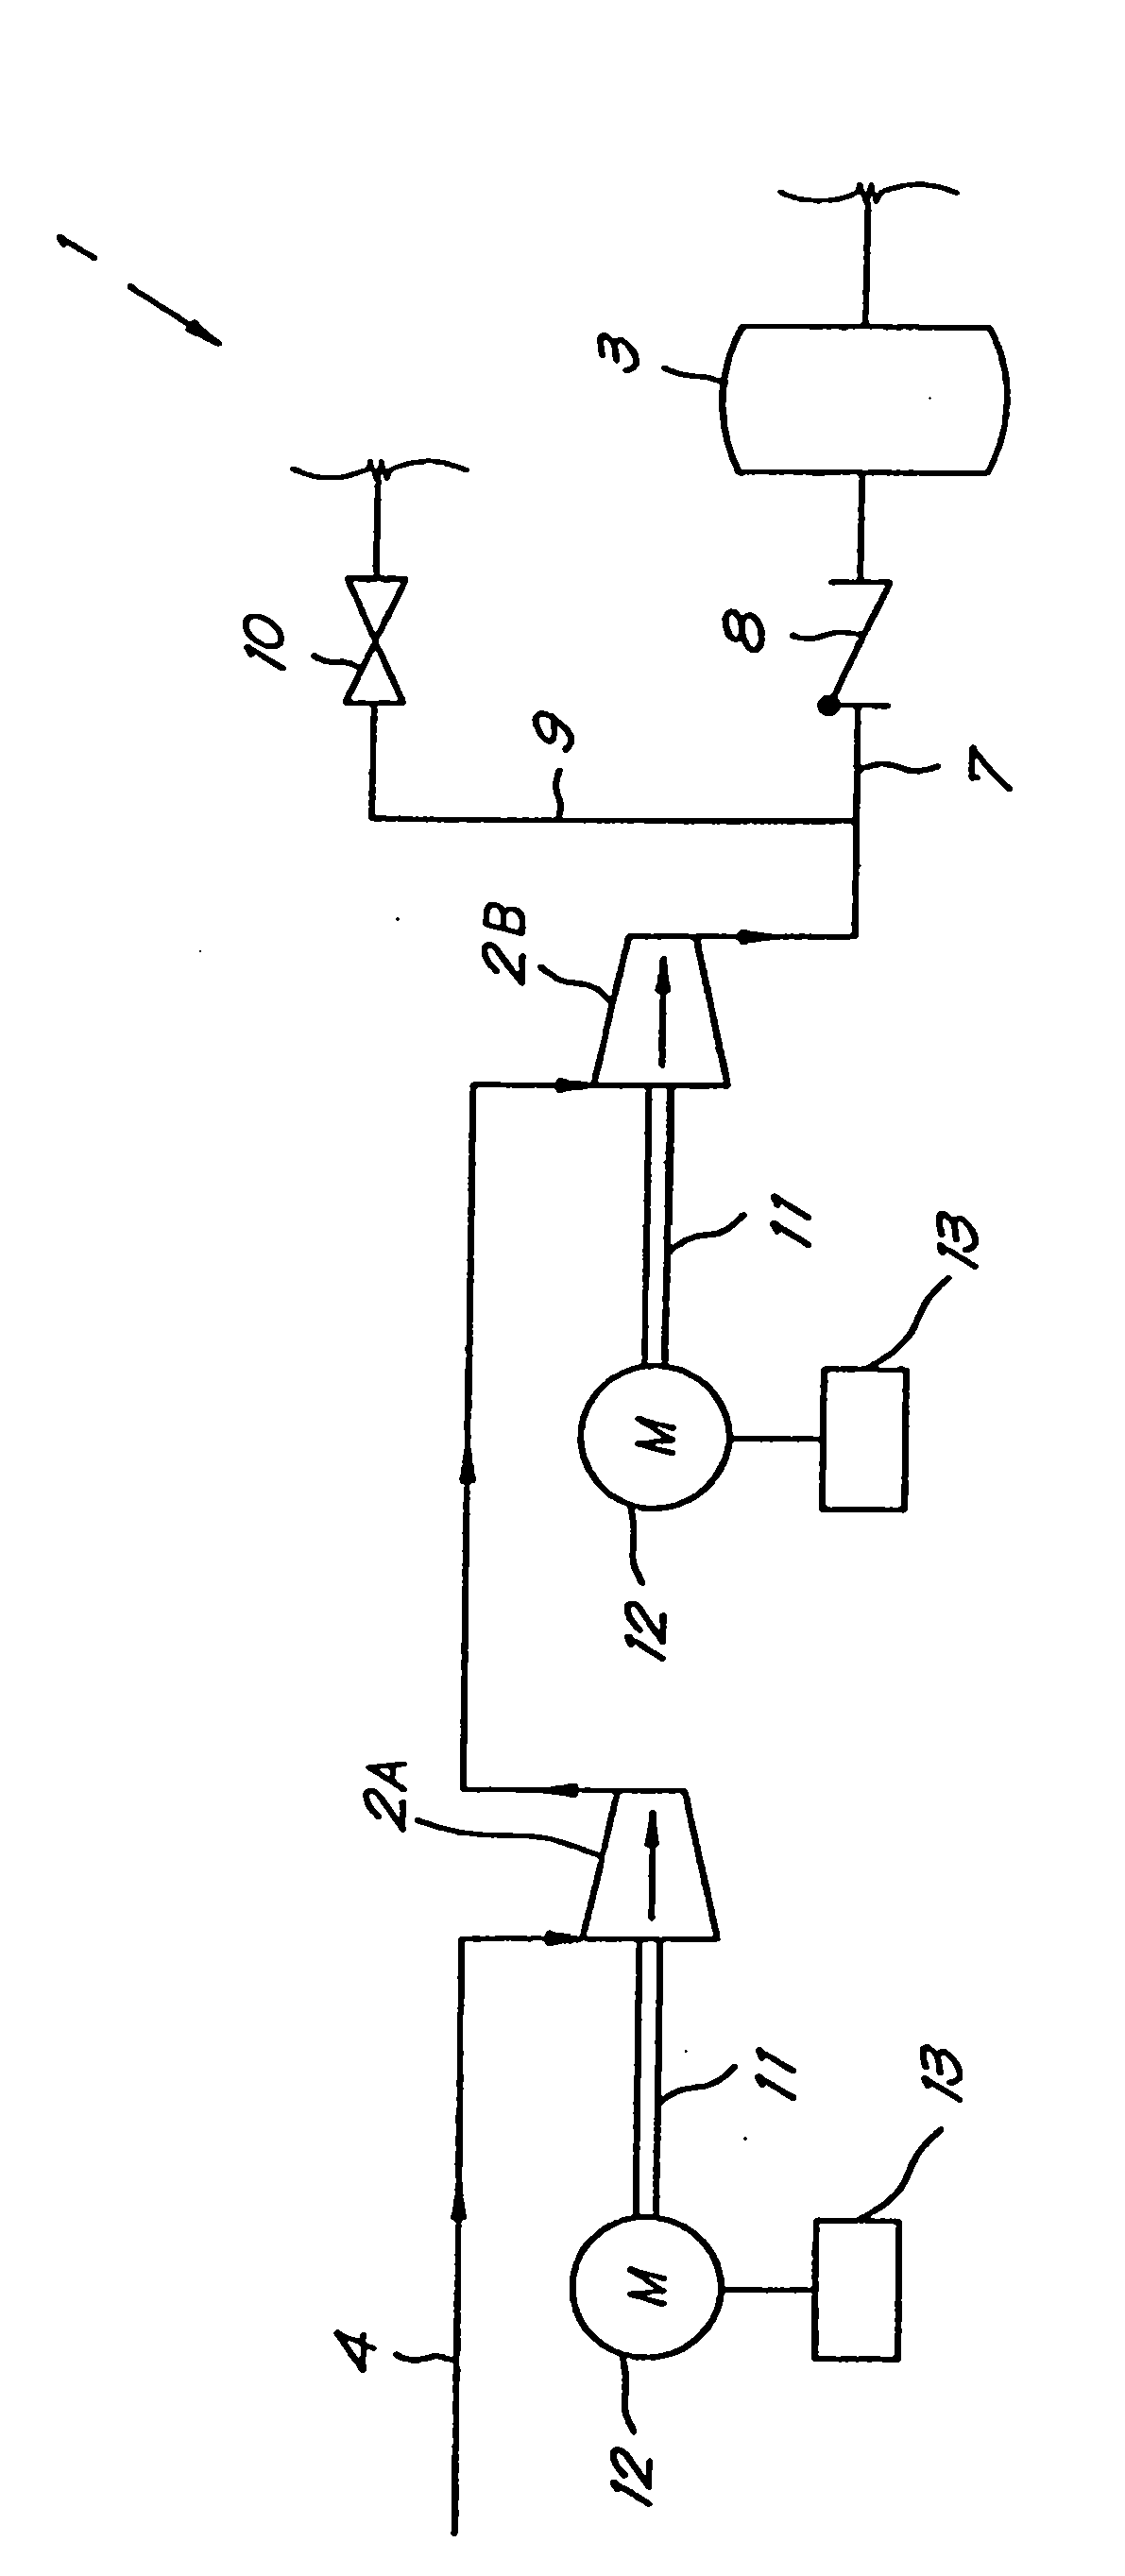 Method for controlling a compressor